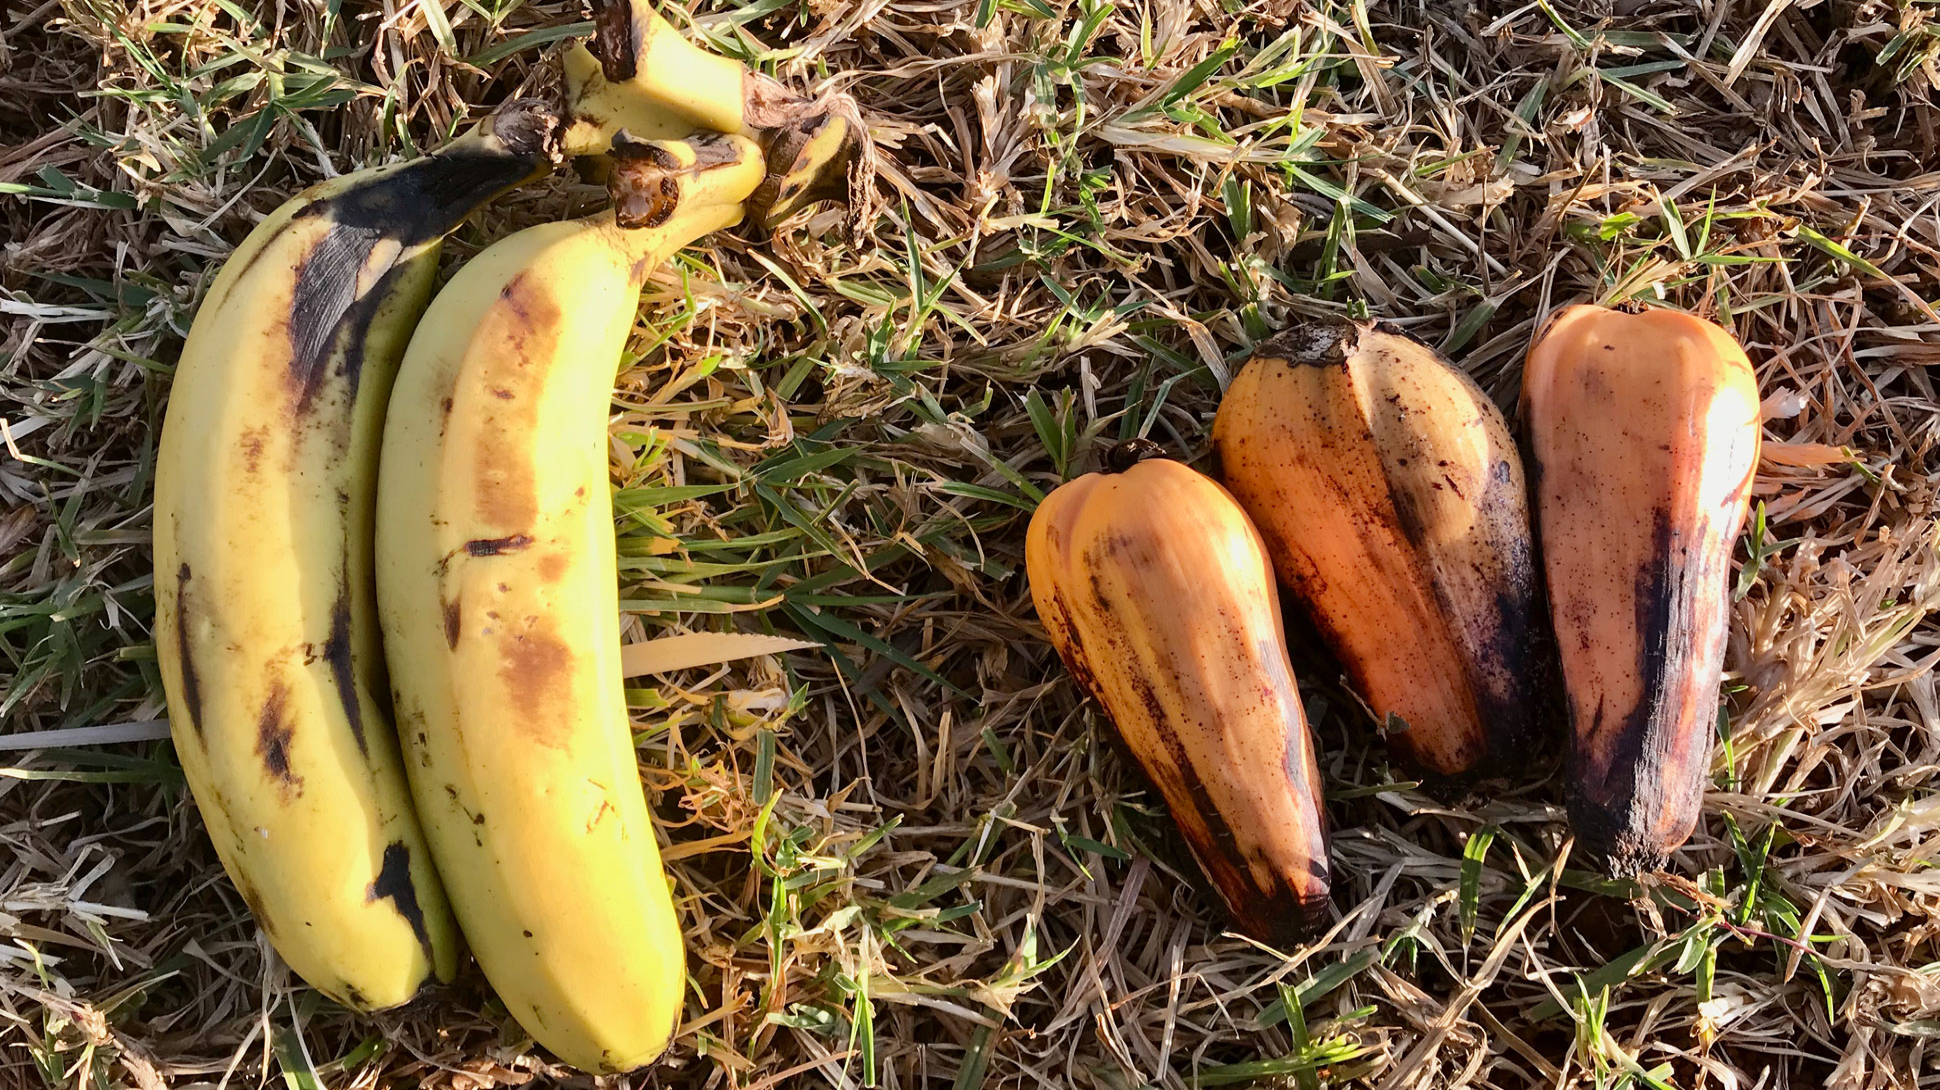 Two yellow bananas laid next to three enset fruits on the grass. The enset fruits are small, stubby and orange